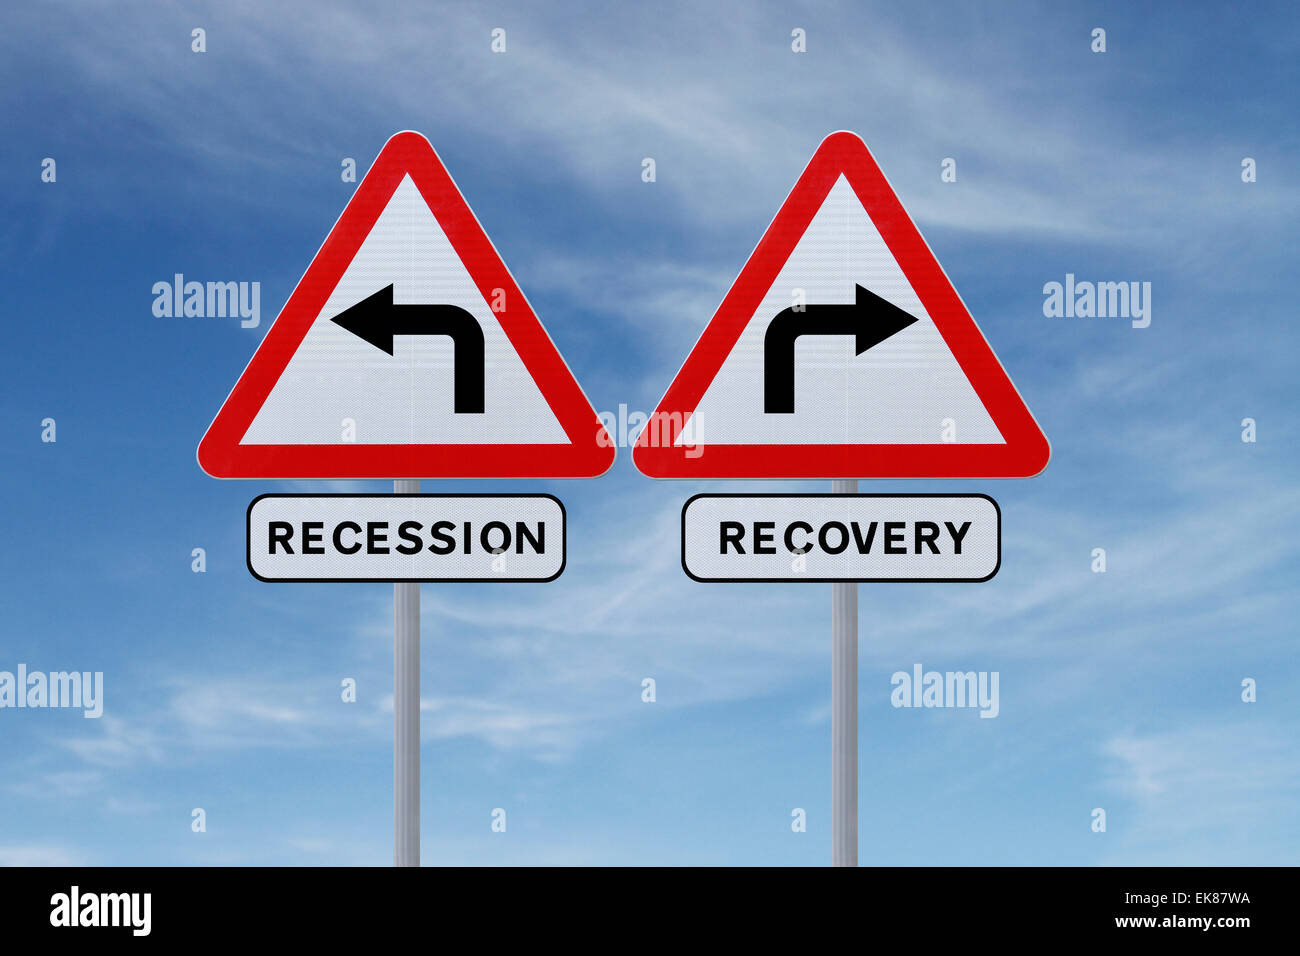 Recovery or Recession Stock Photo